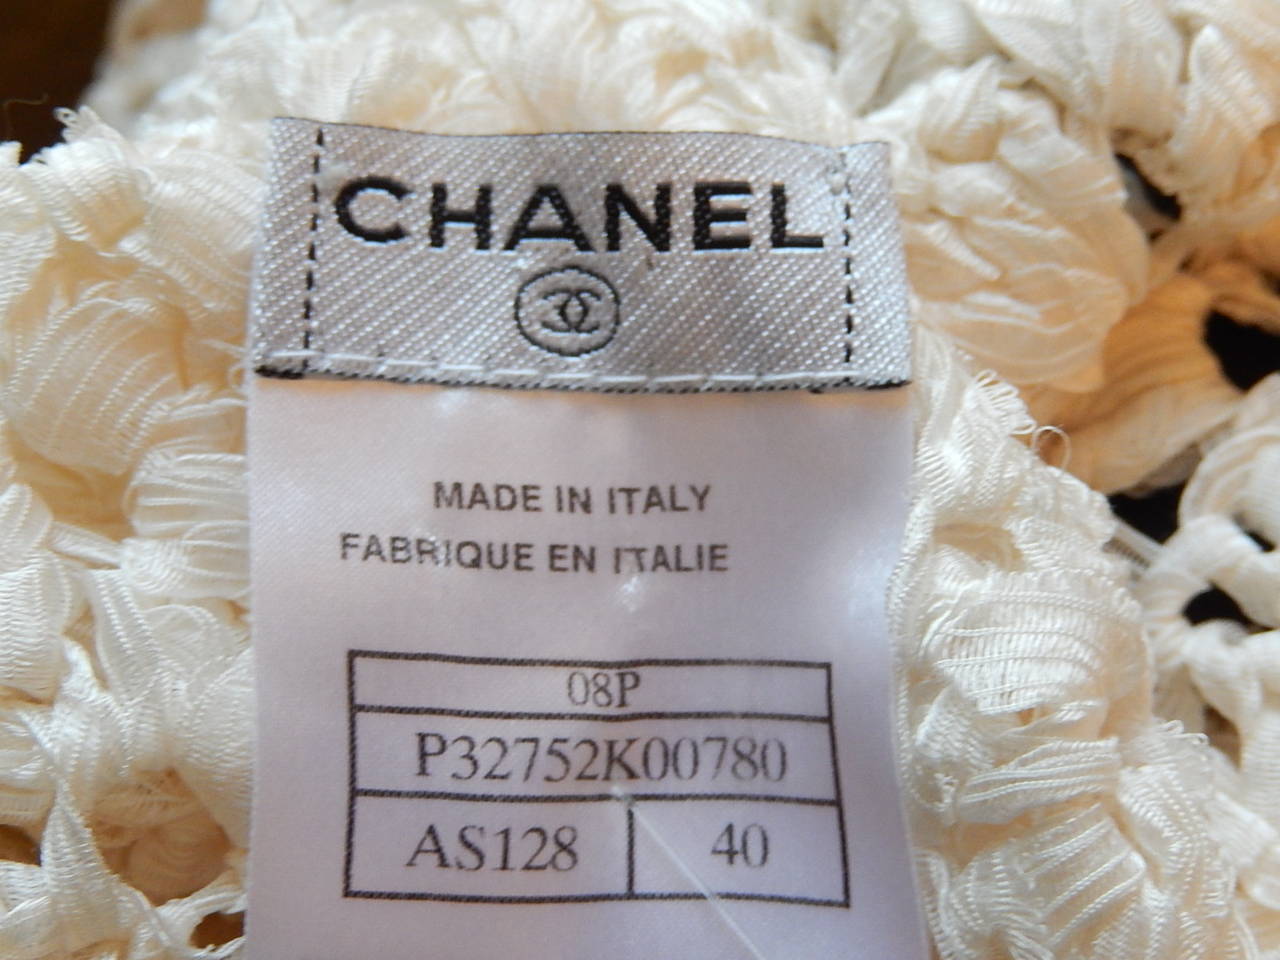 Chanel Ivory Silk Crocheted Dress with Black Slip Lace Edged Size 40 For Sale 3